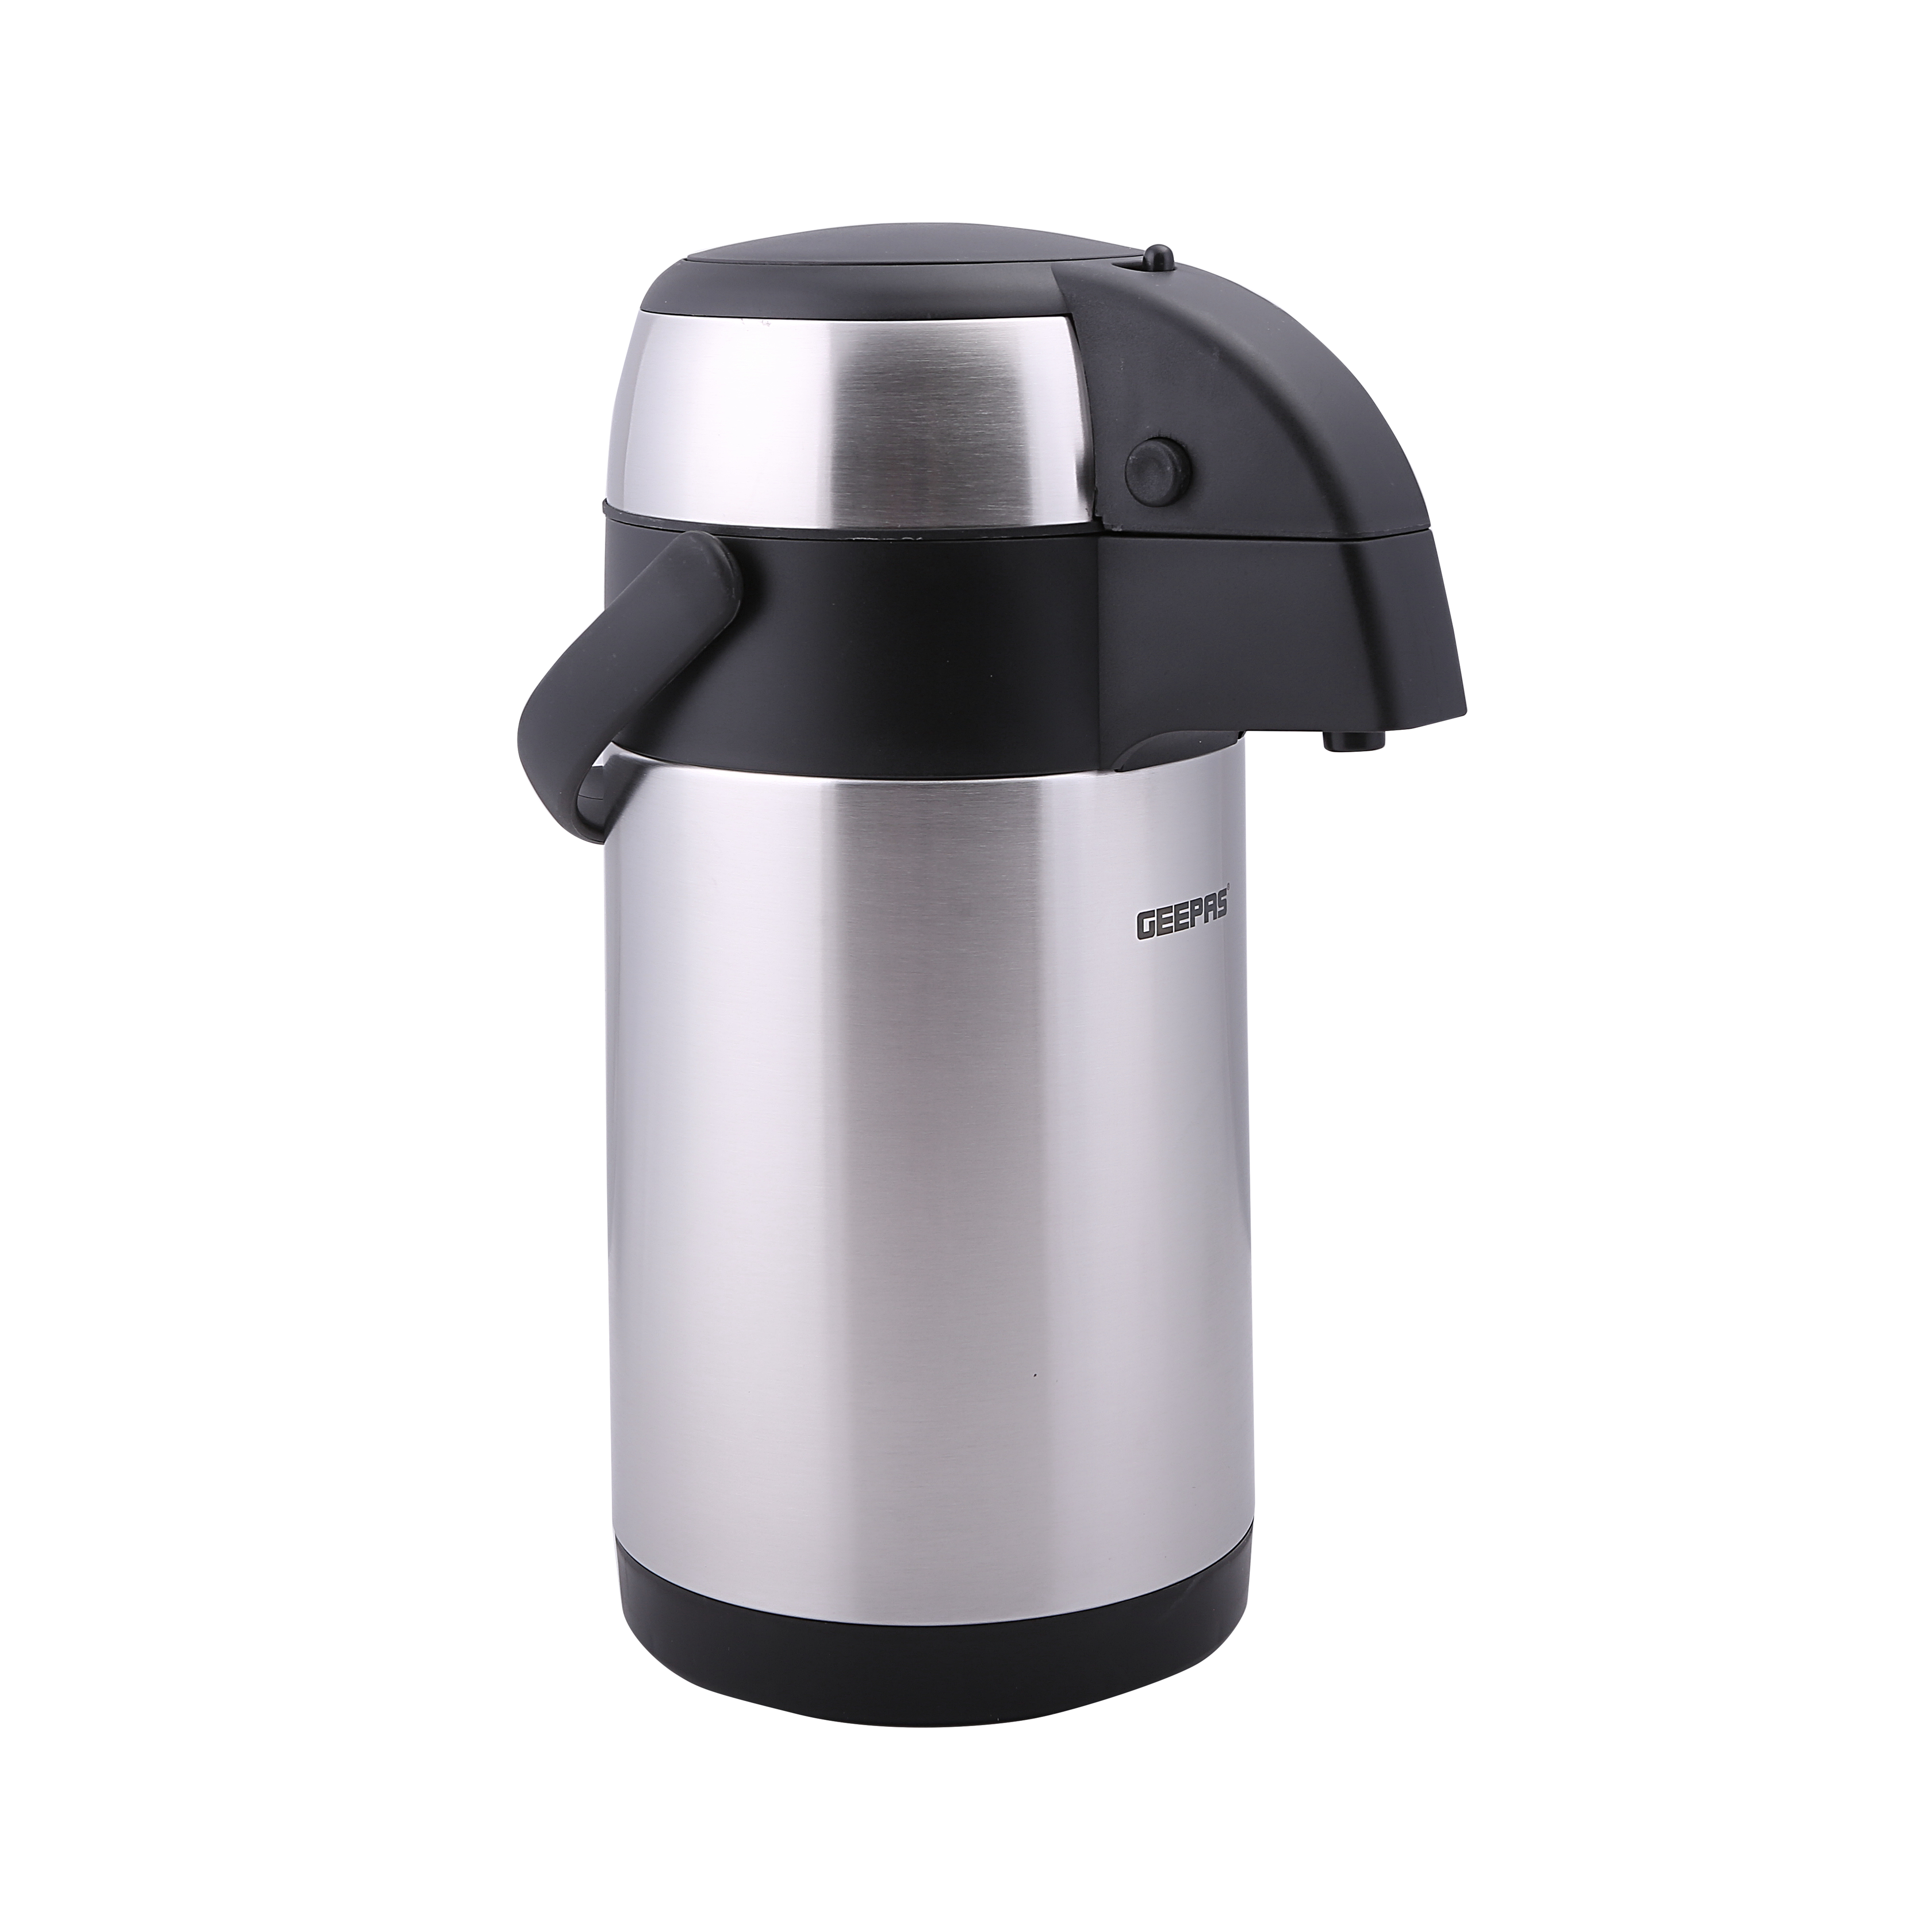 2.5L airpot coffee dispenser with pump 24hour thermal insulated